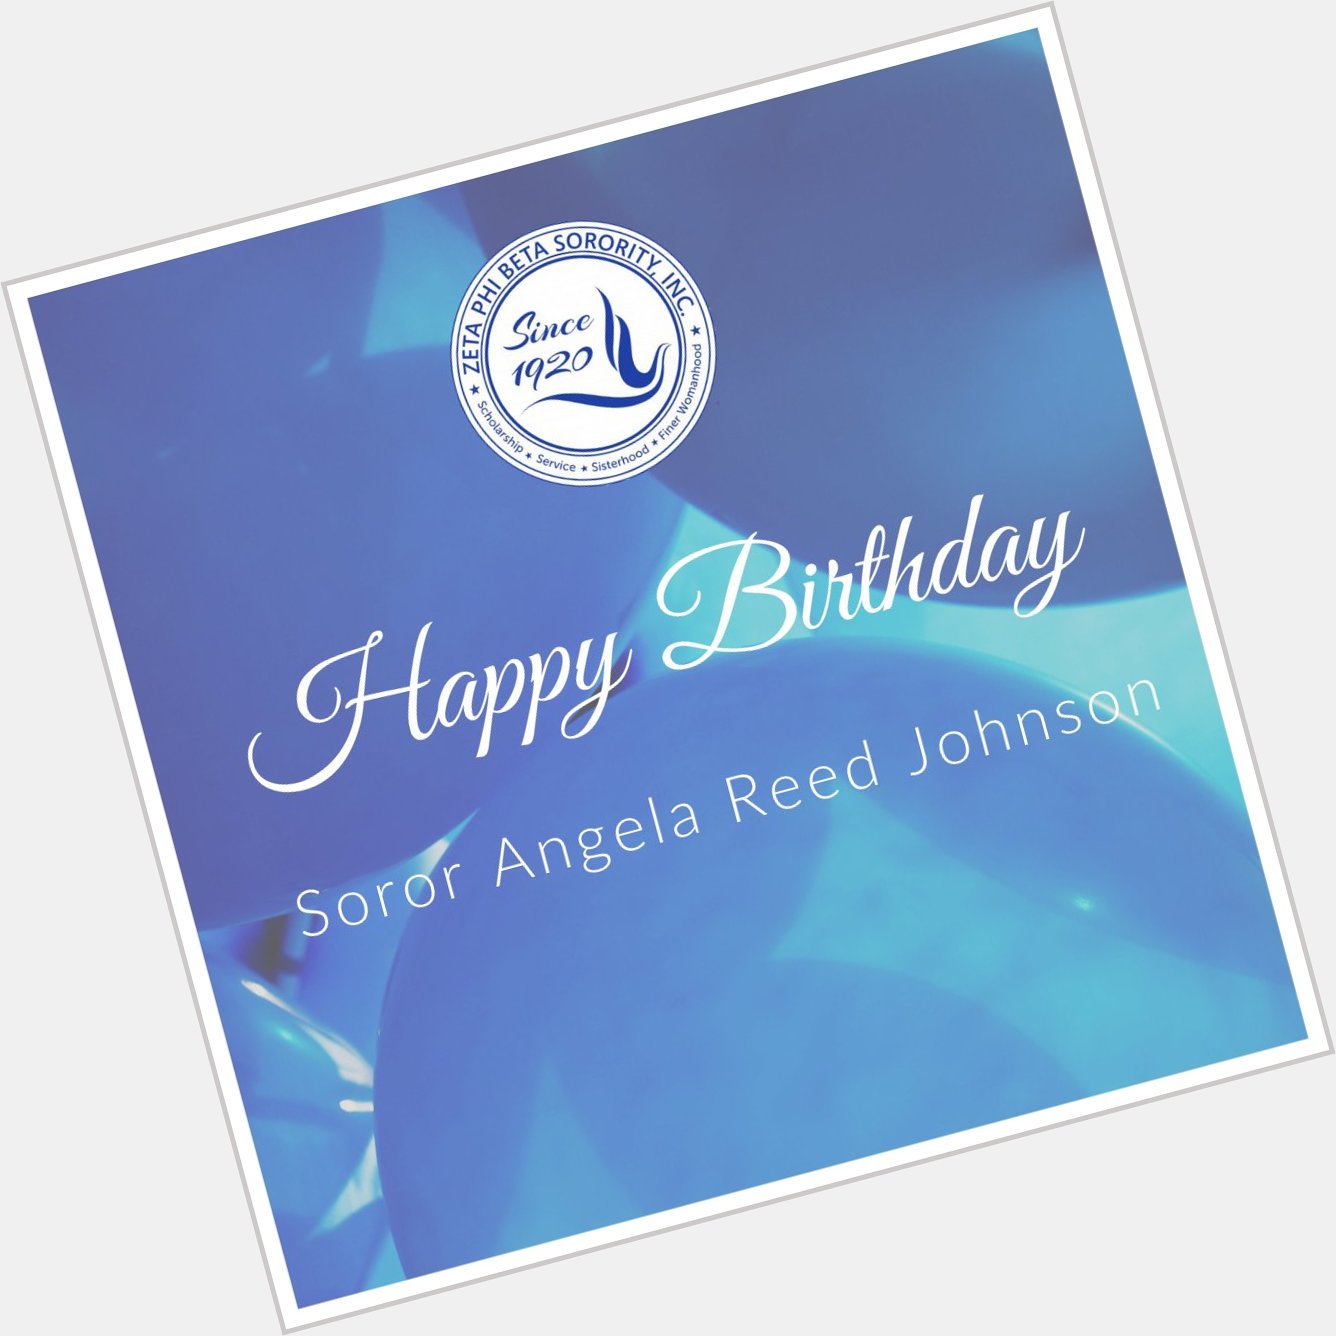 Happy Birthday to Soror Angela Reed Johnson! We hope you have an amazing day! 